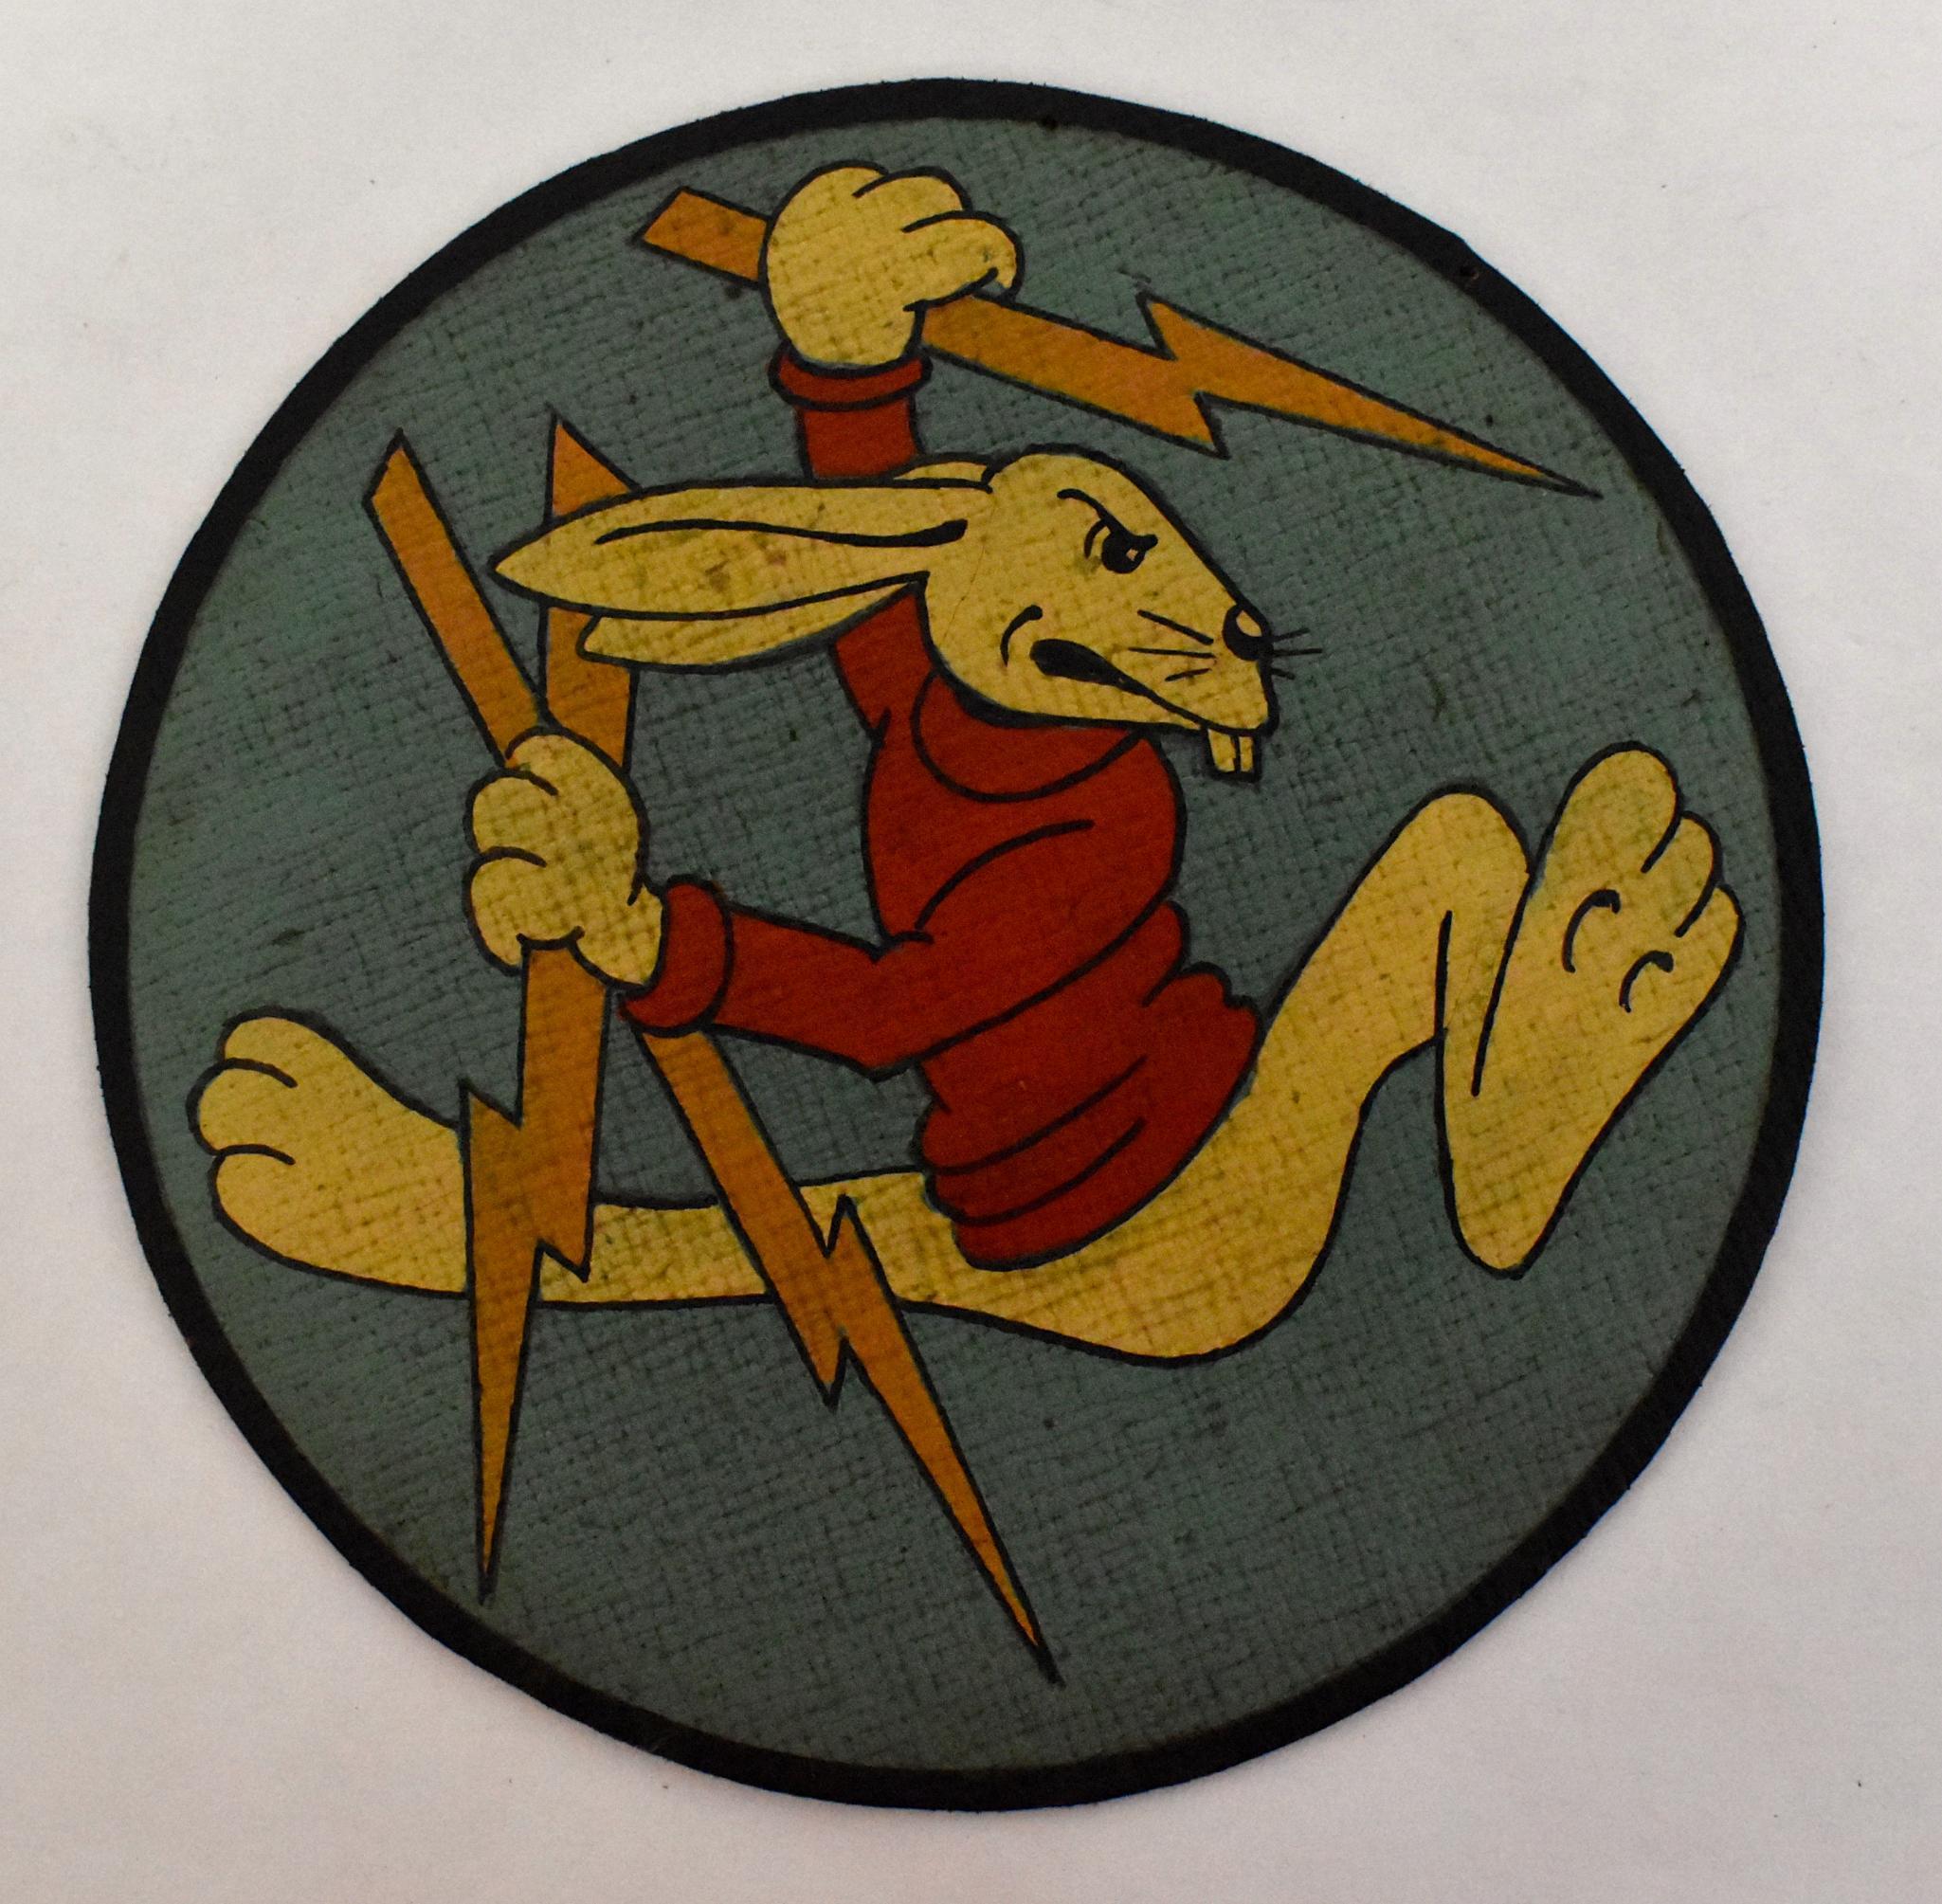 40s vintage squadron patch スコードロンパッチ ヴィンテージ バックスバニー A-2 bugs bunny ミリタリー  オリジナル レザー air force - ミリタリー